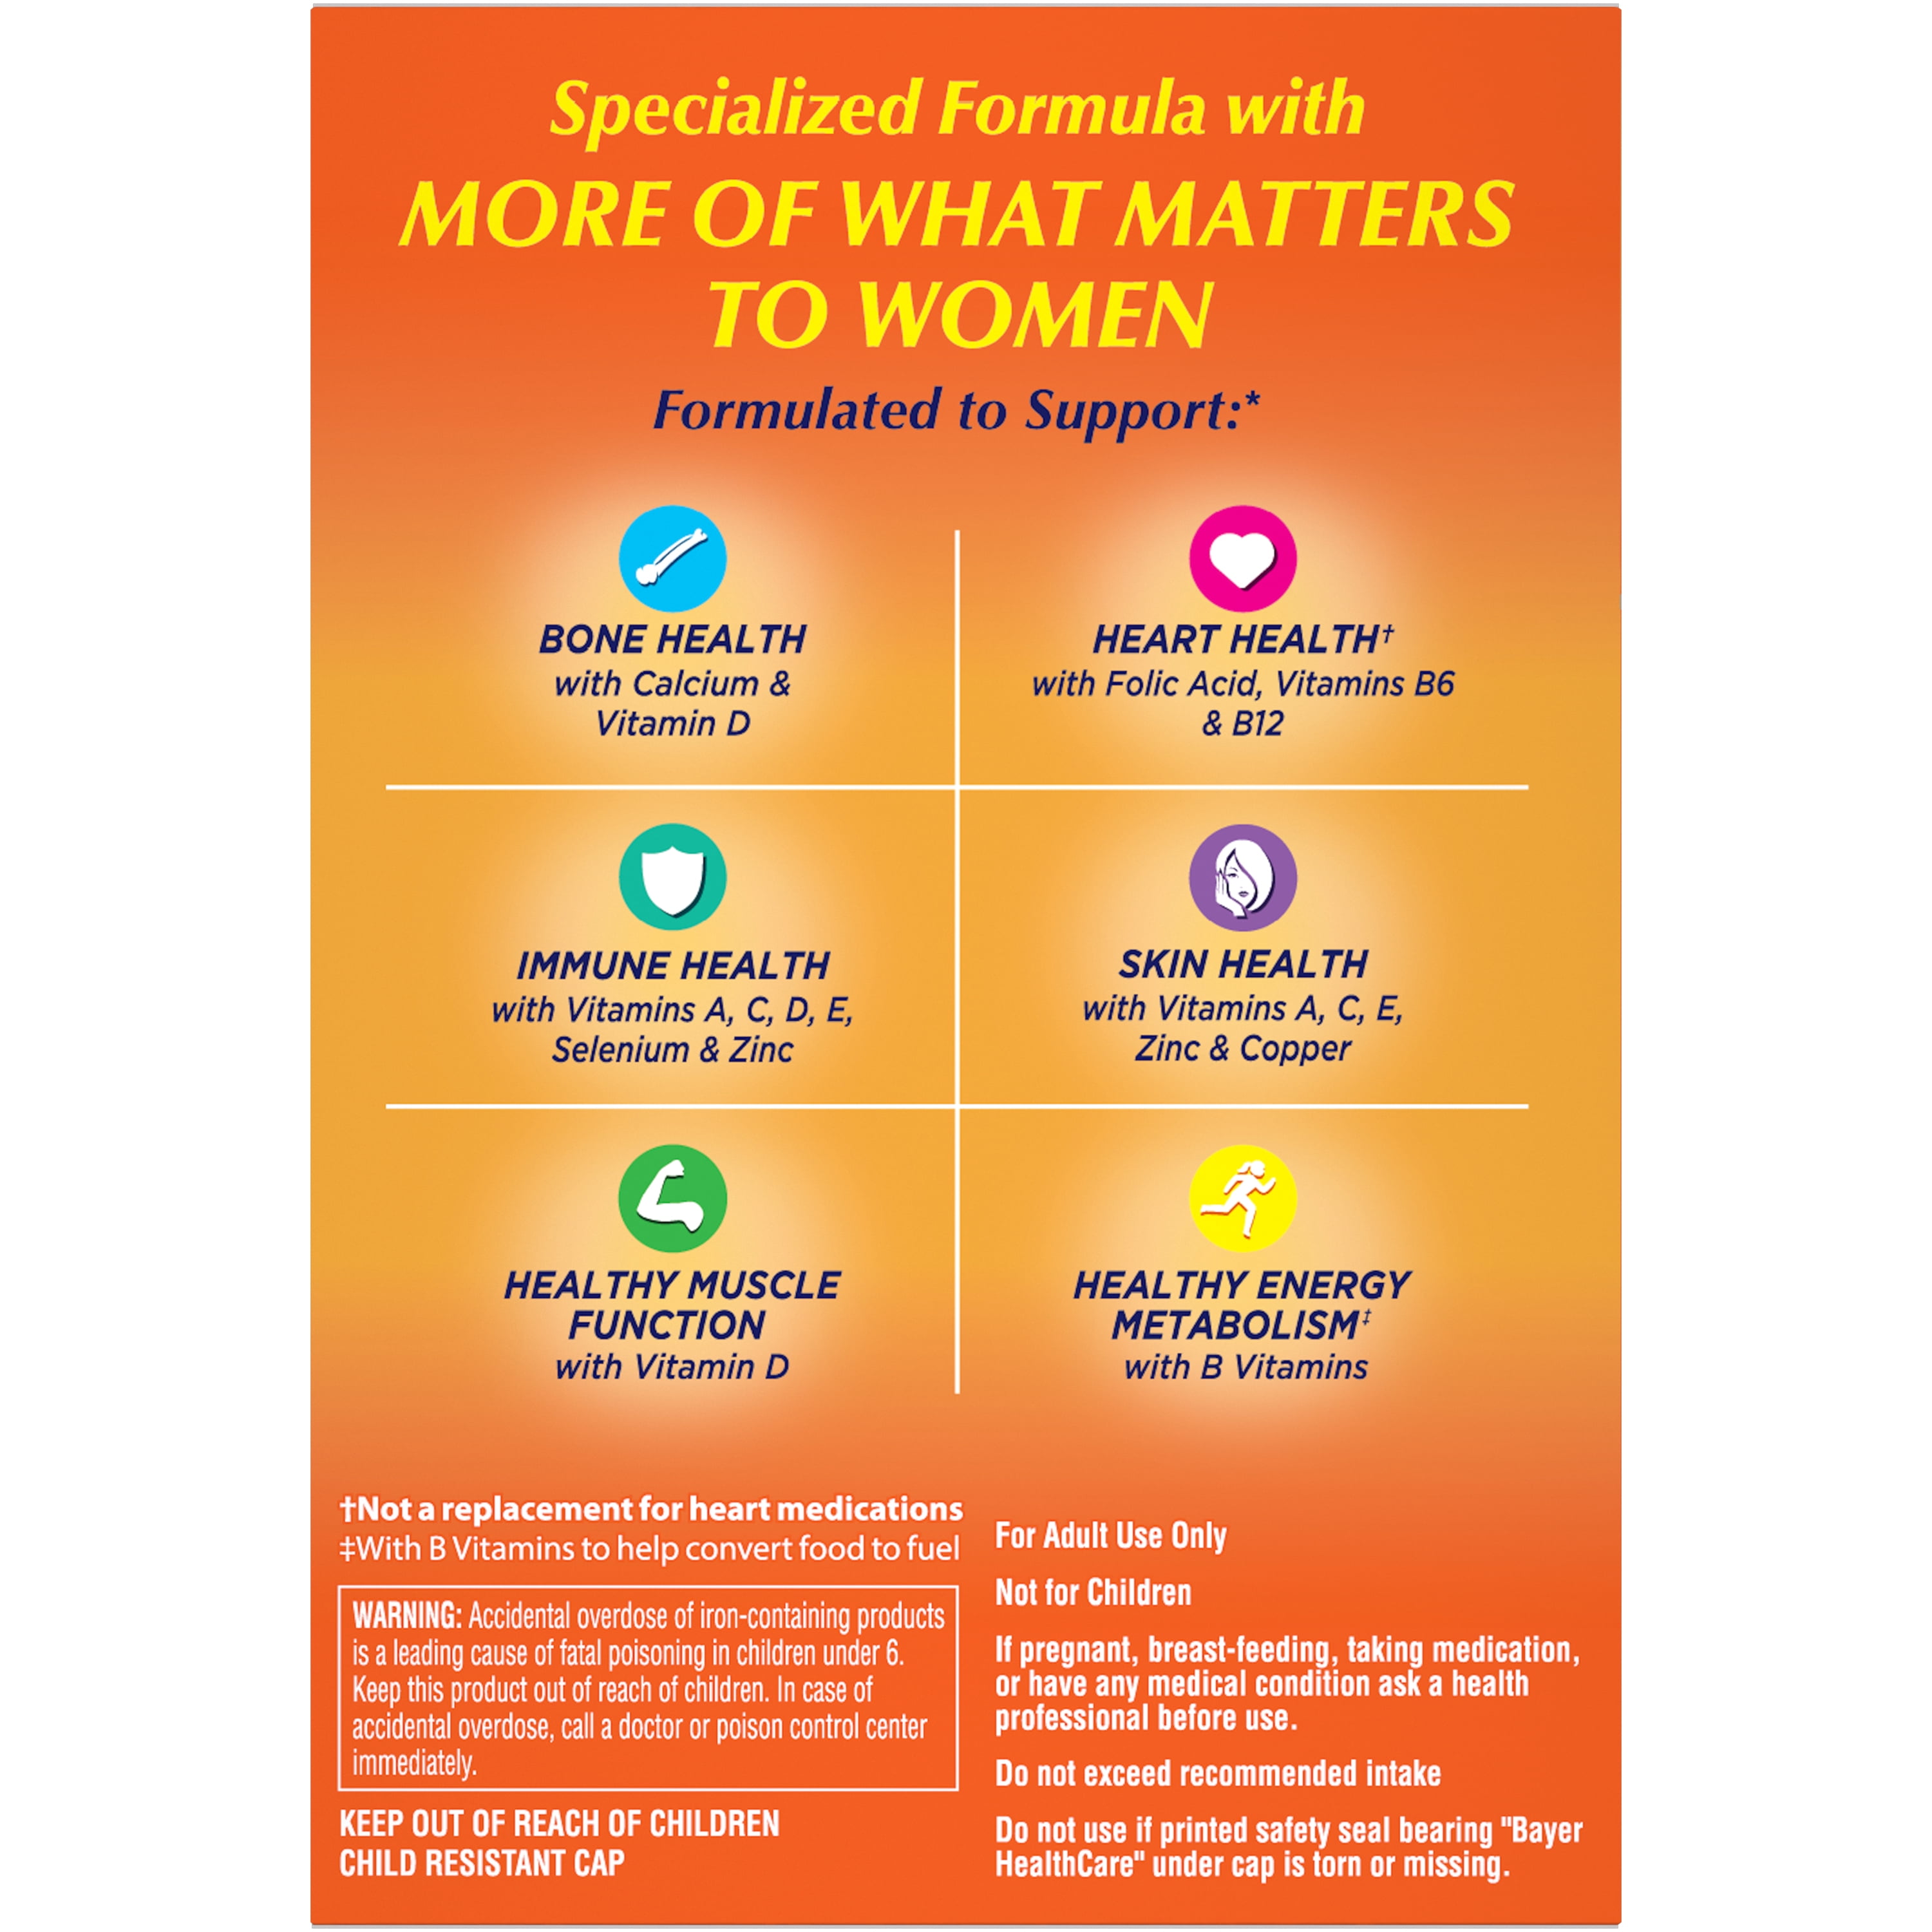 One A Day Womens Petites Multivitamin Supplement With